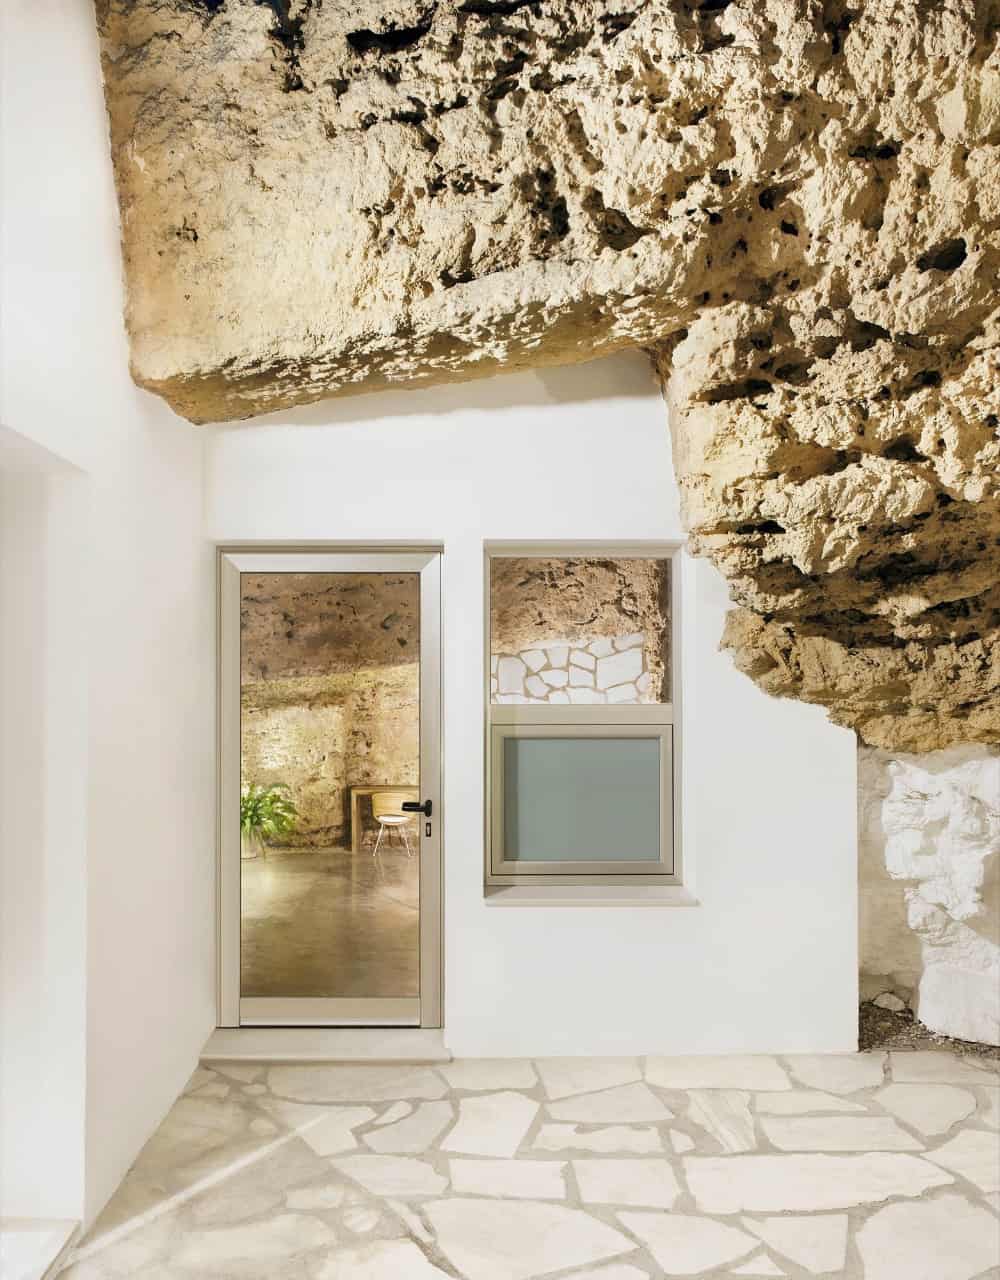 Cave elements stand out beautifully against stark white